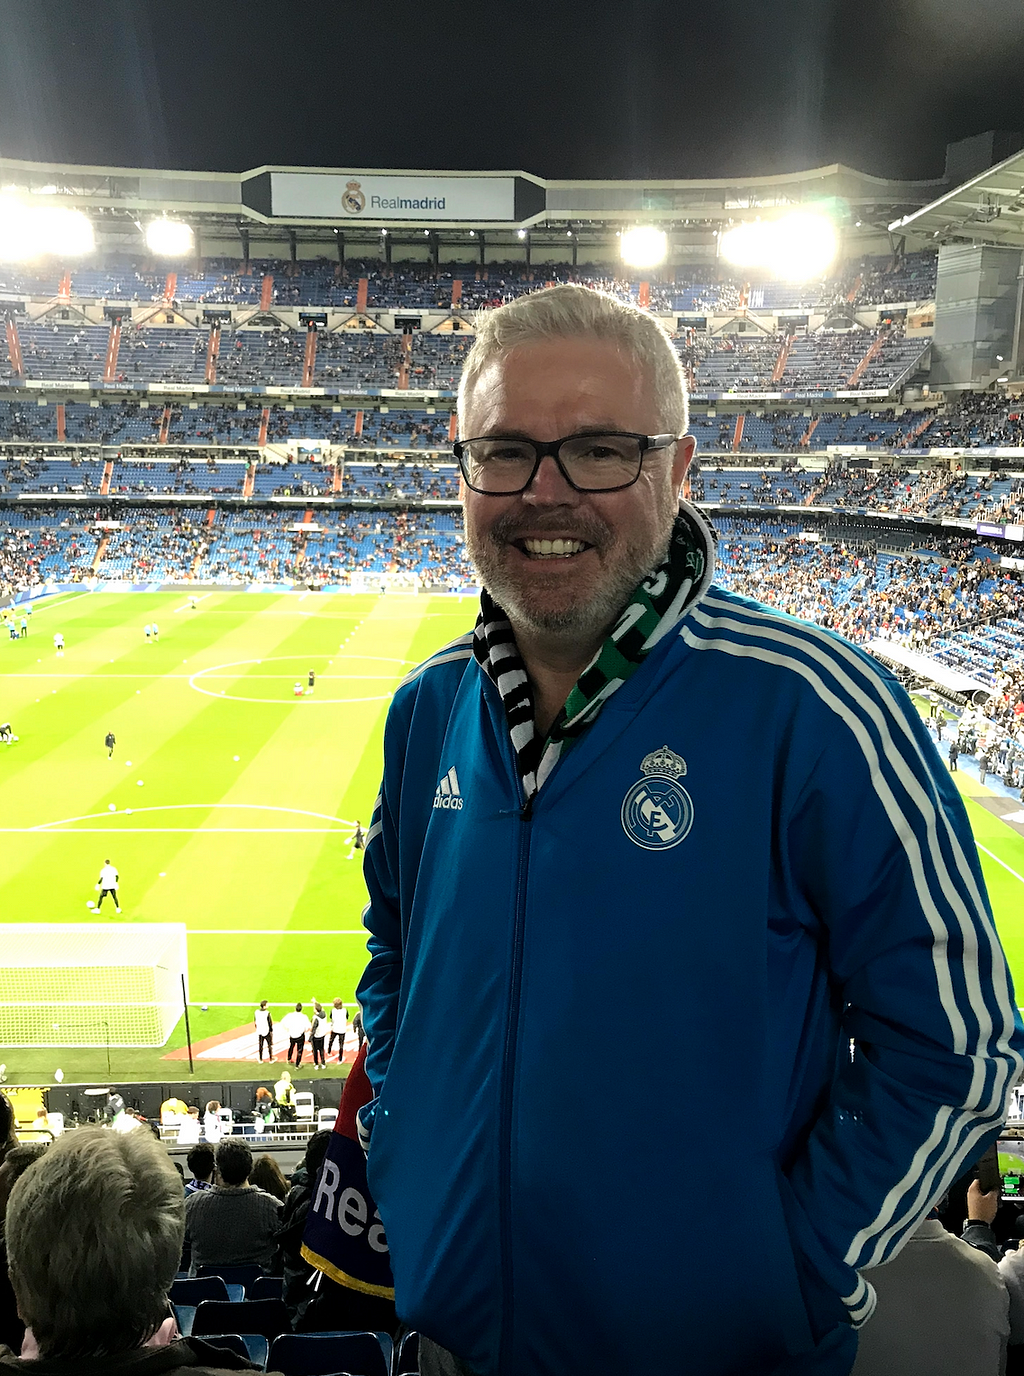 A man in a Real Madrid jacket smiles in front of the soccer field.